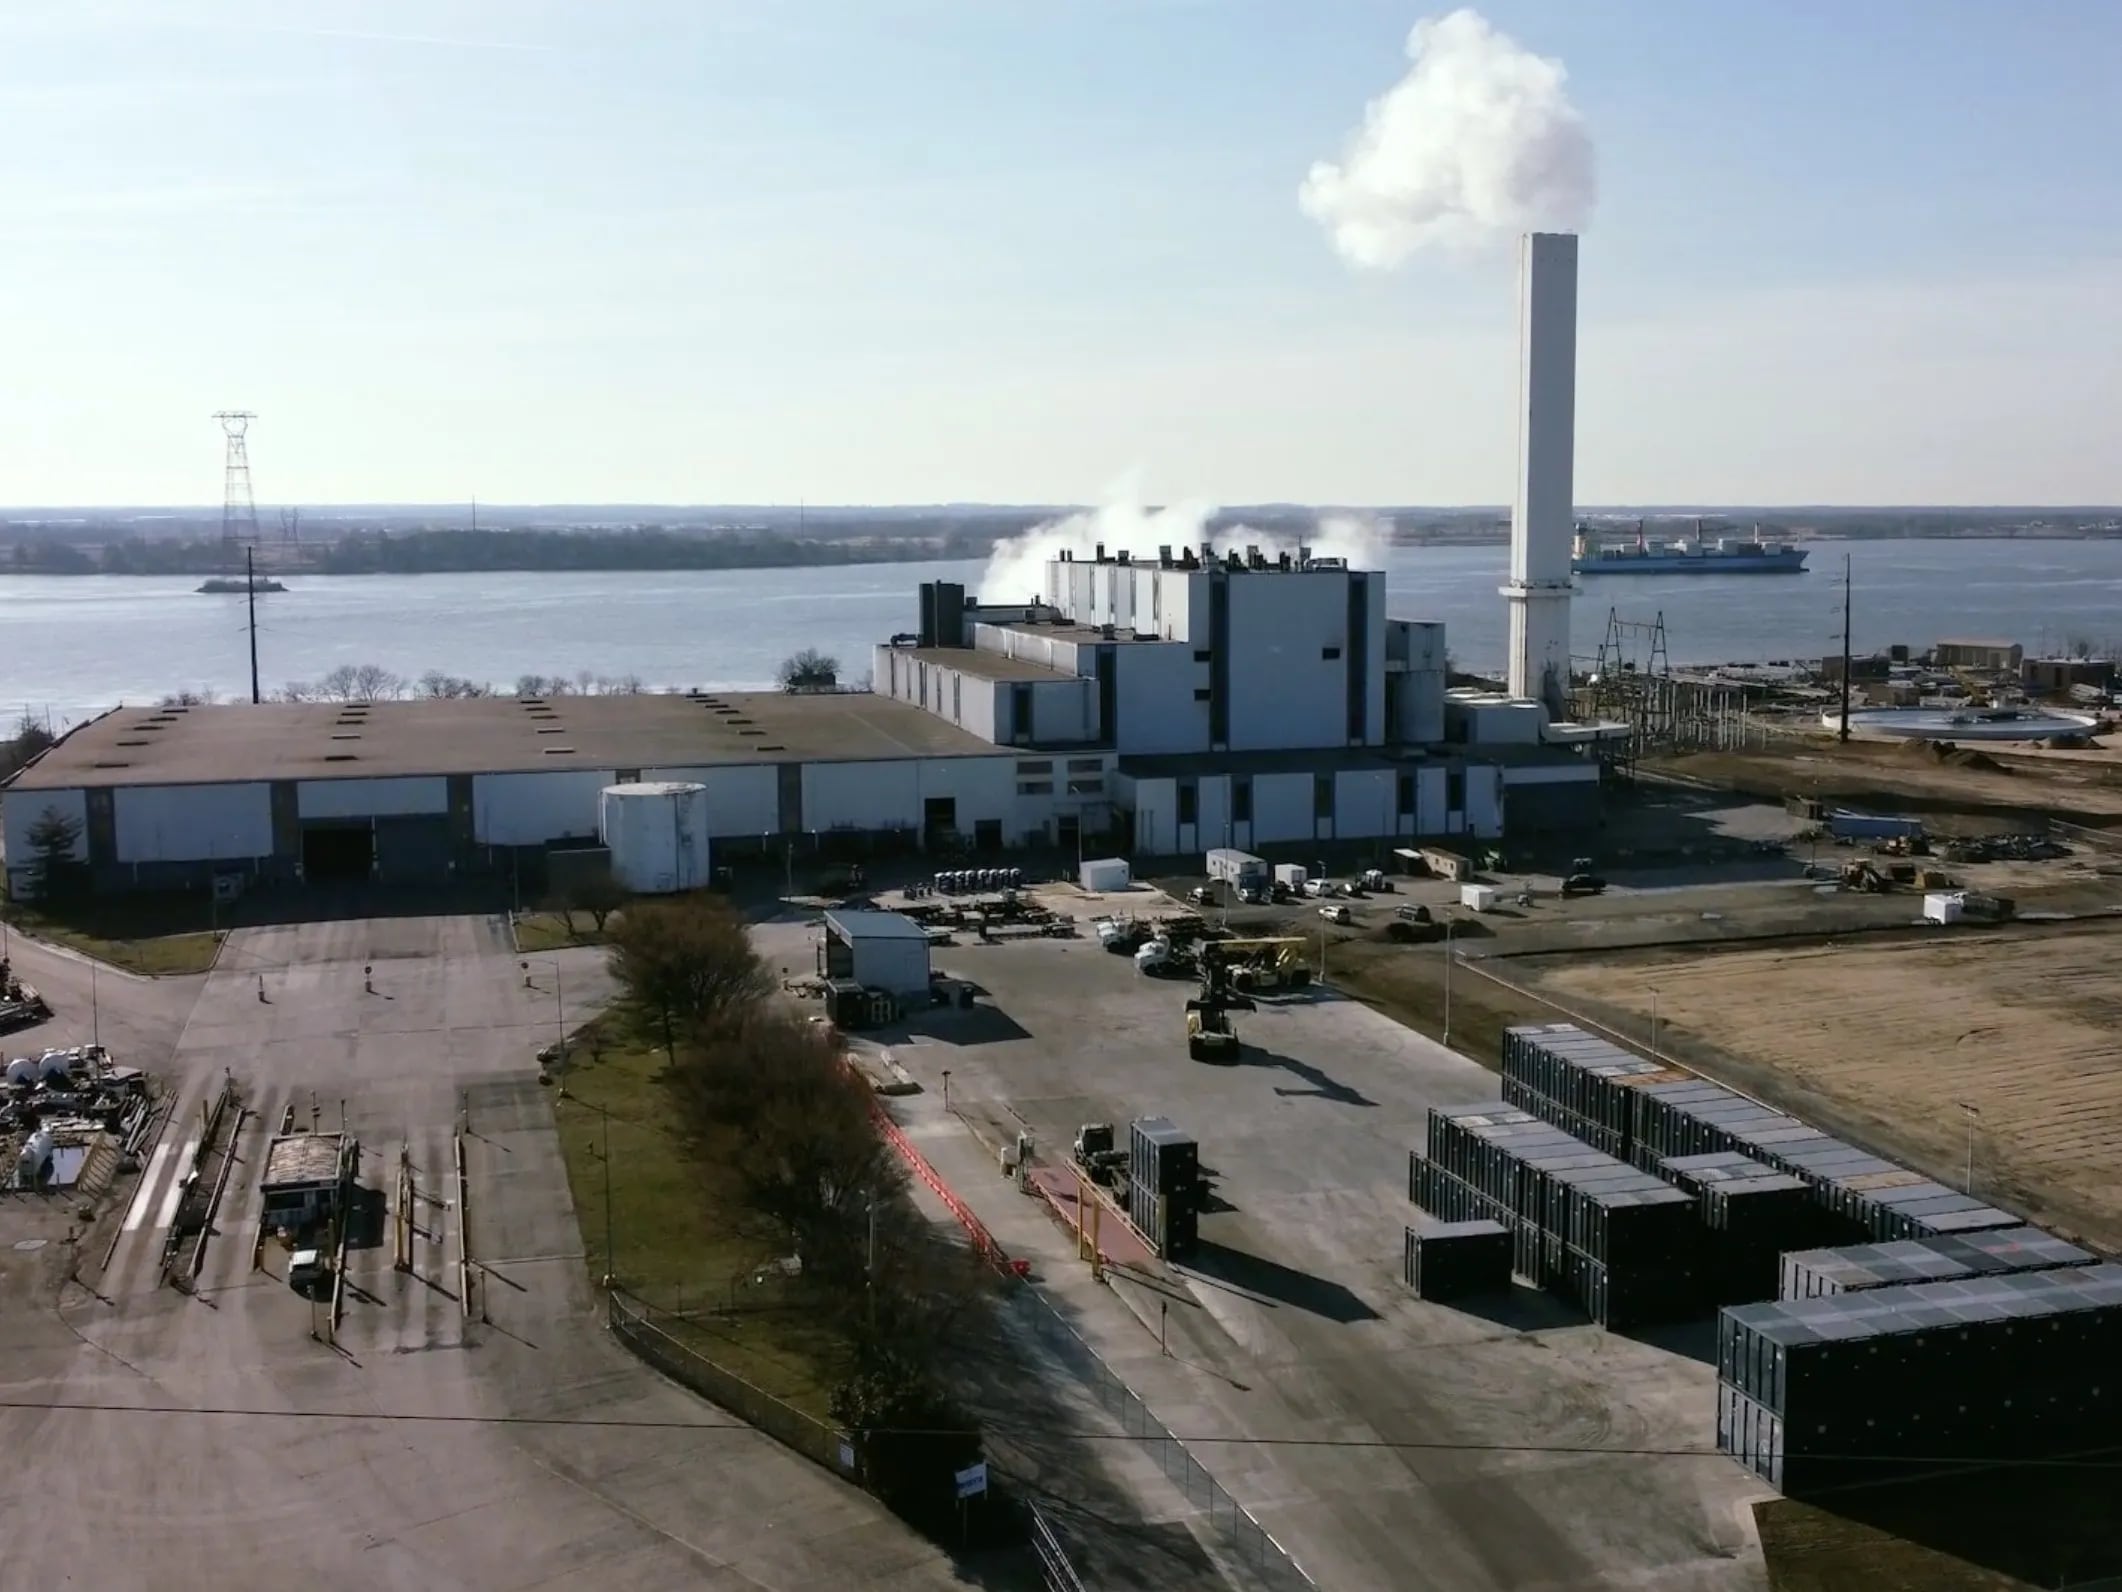 A still from the short documentary film "Trash & Burn," about the trash incinerator plant in Chester. The plant burns 3,500 tons of trash per day and is the largest of its kind in the country.